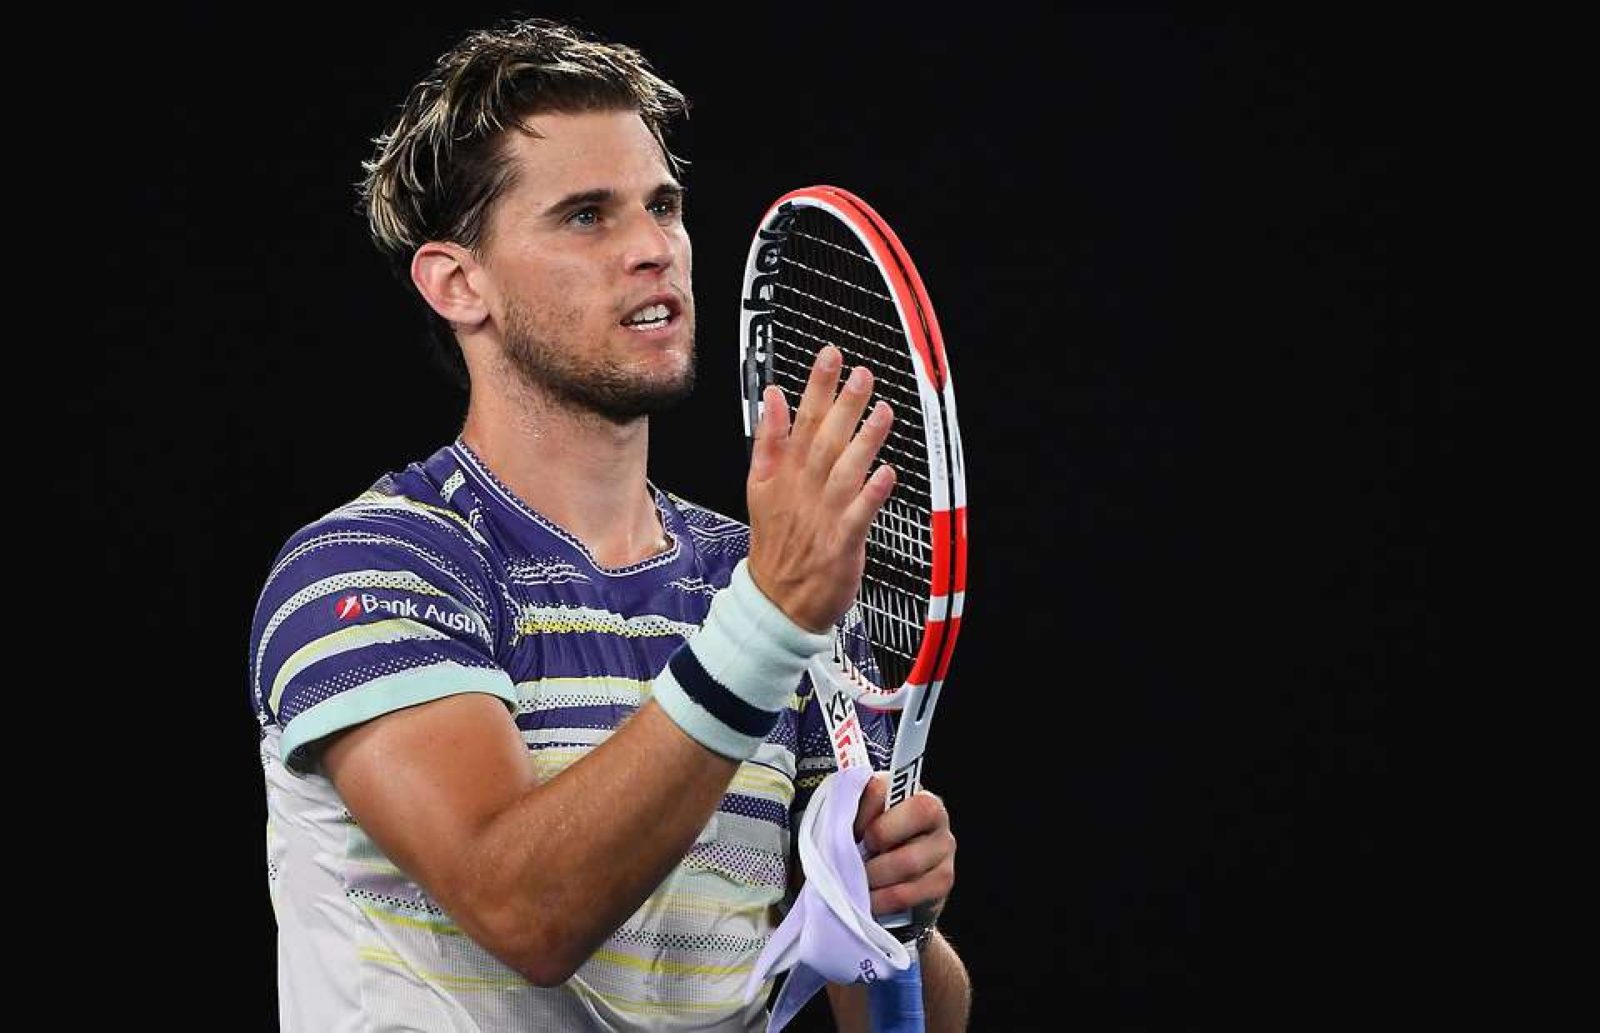 Nearing 30, Dominic Thiem thinks of a life beyond tennis, but